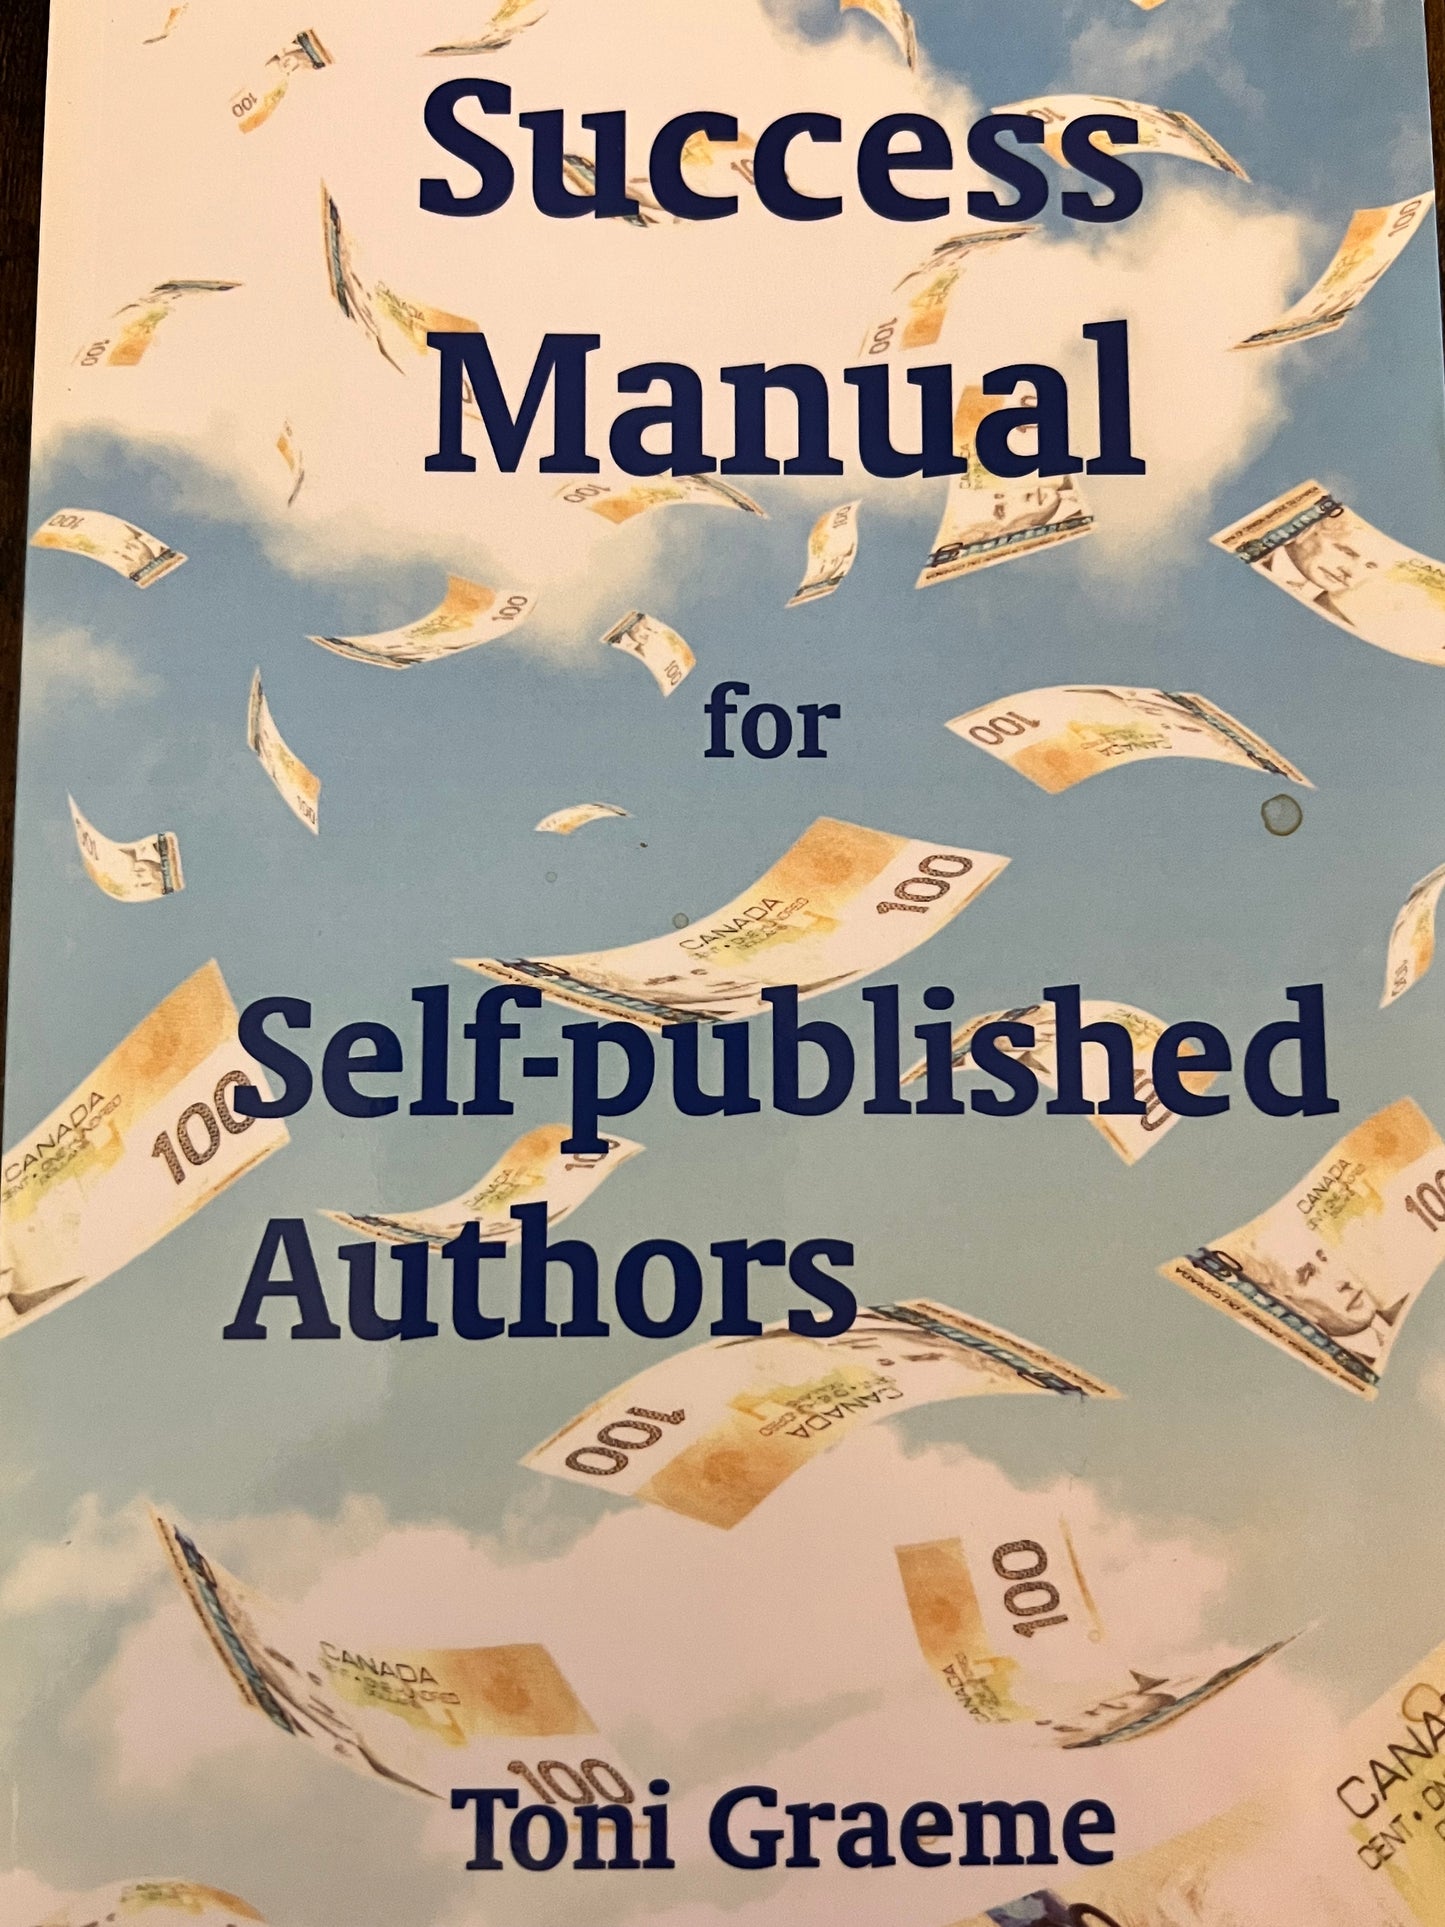 Success Manual for Self-published Authors by Toni Graeme